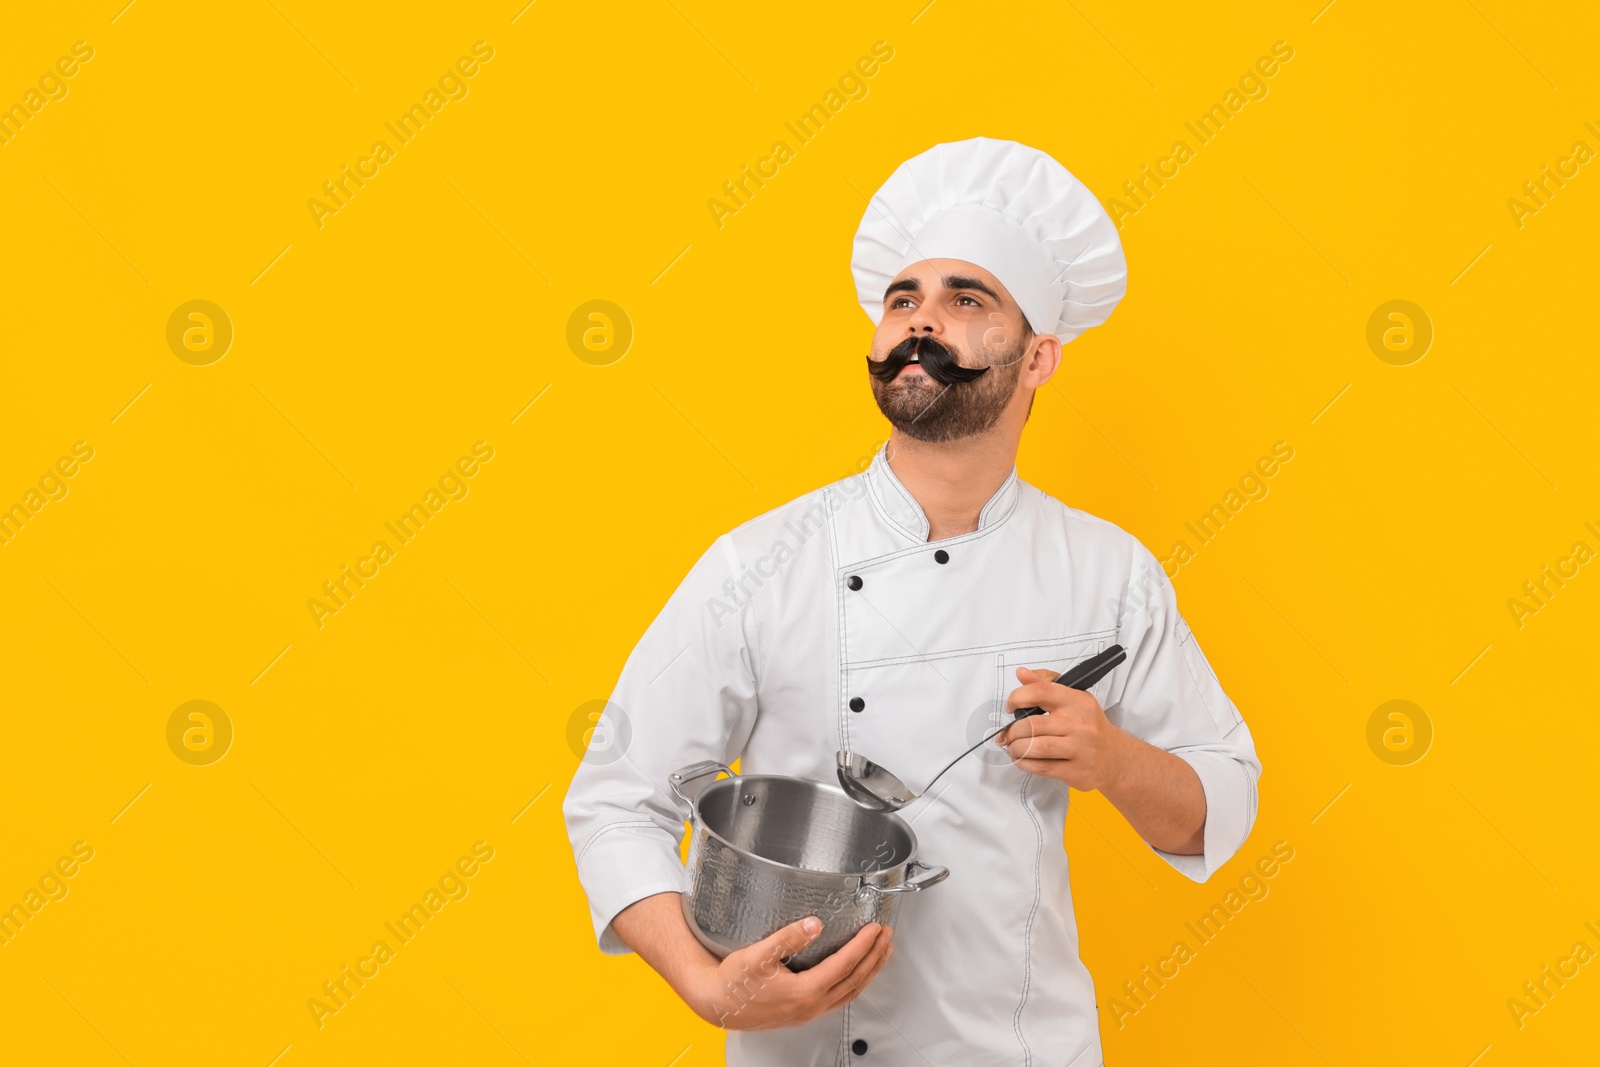 Photo of Professional chef with funny artificial moustache holding cooking pot and ladle on yellow background. Space for text